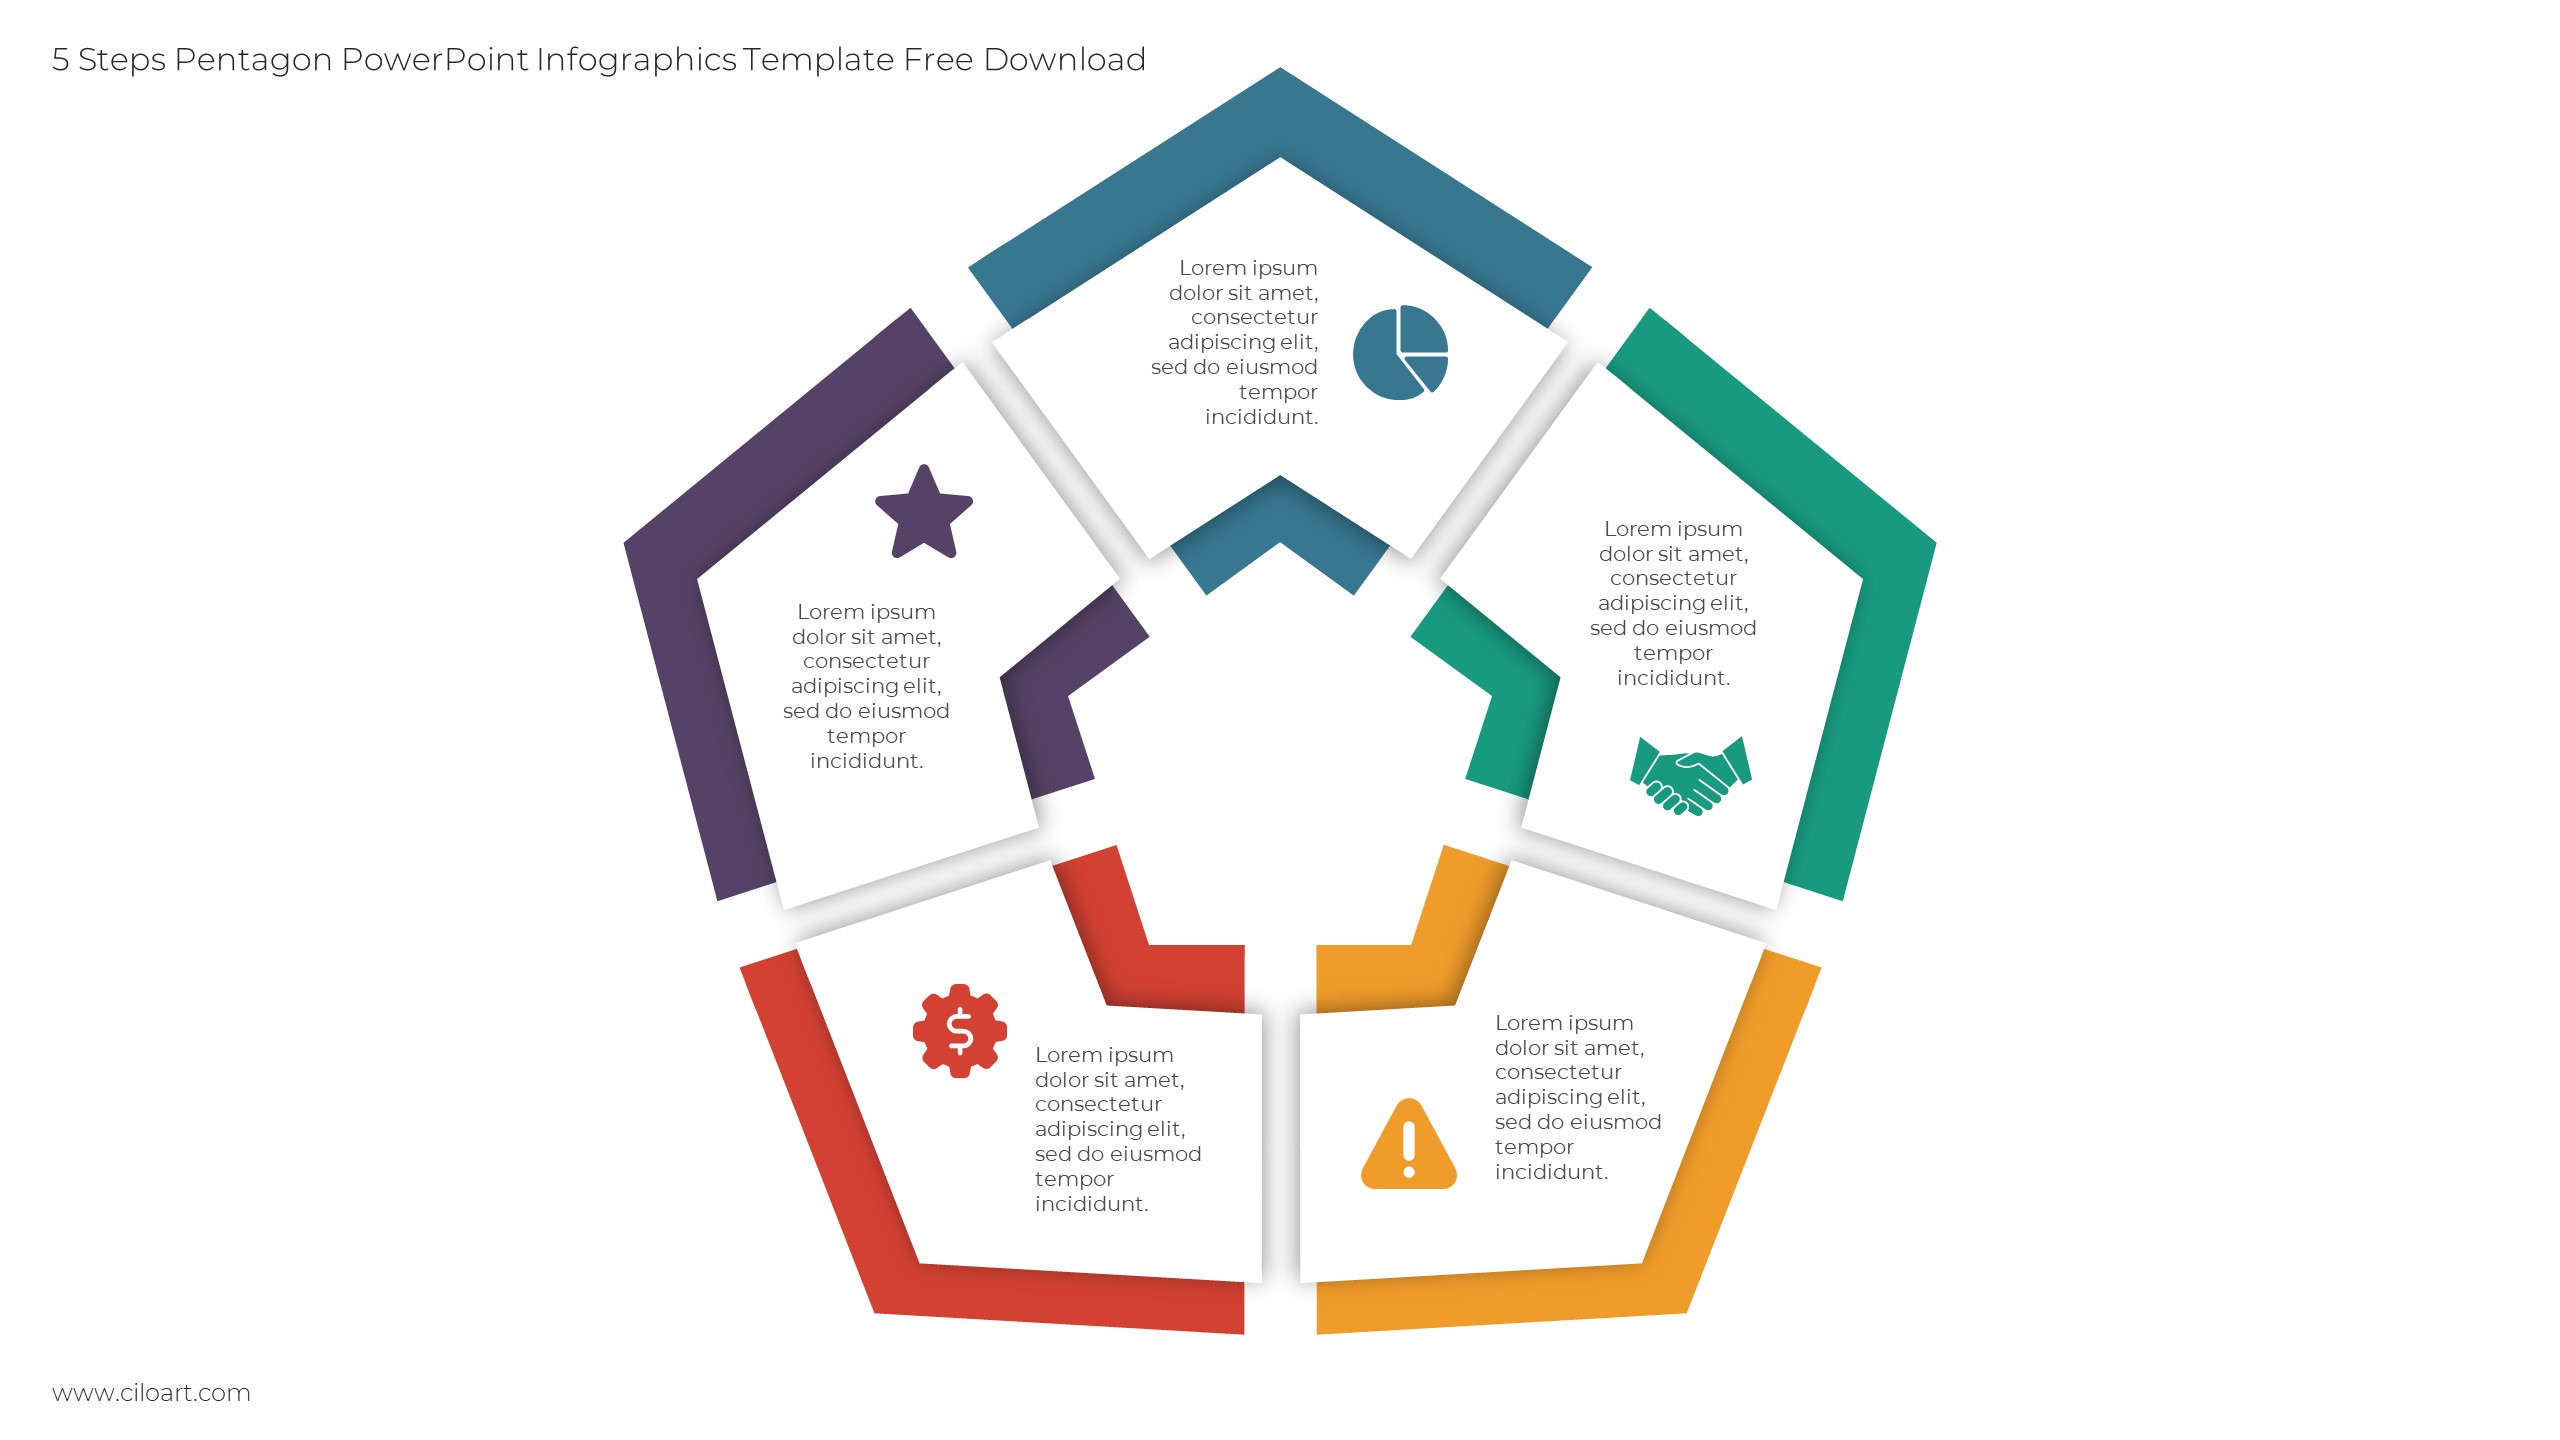 5 Steps Pentagon PowerPoint Infographics Template Free Download